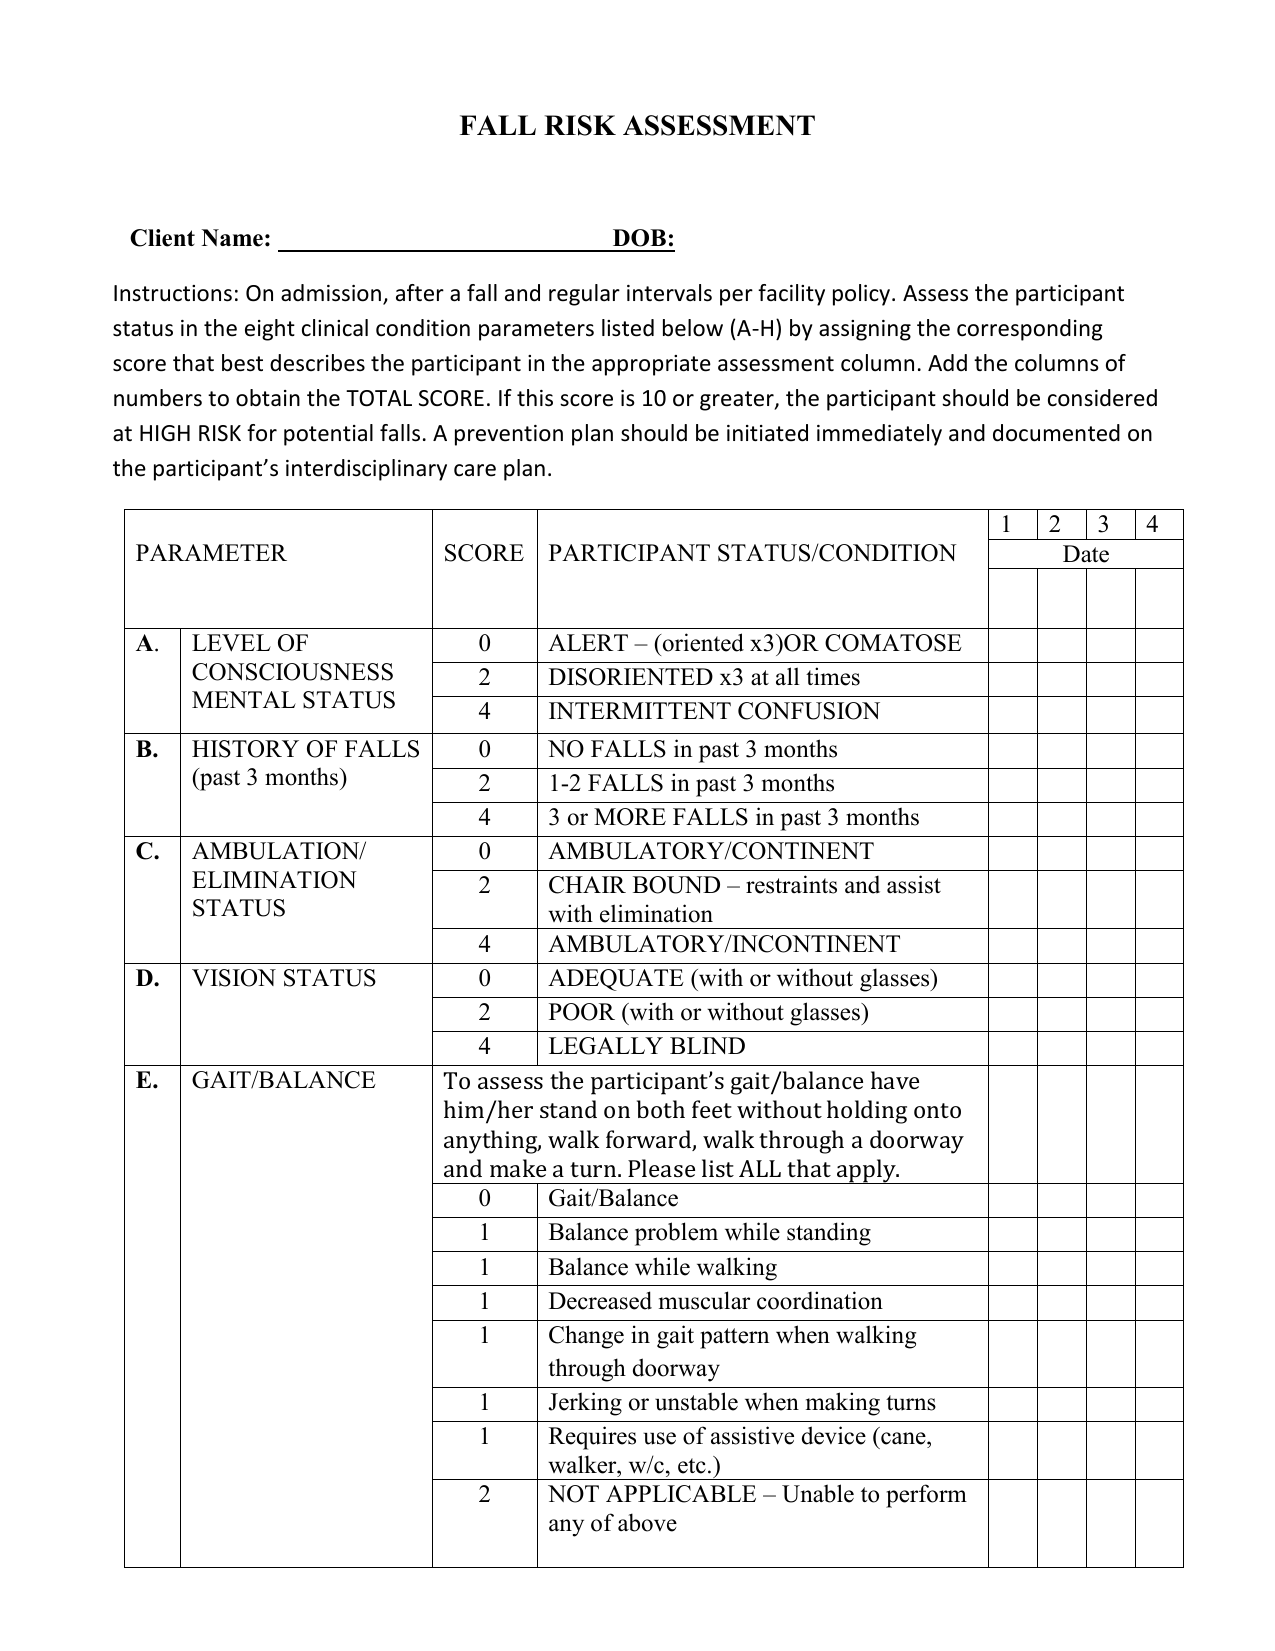 Fall Risk Assessment Form Fill Online Printable Fillable Blank | Images ...